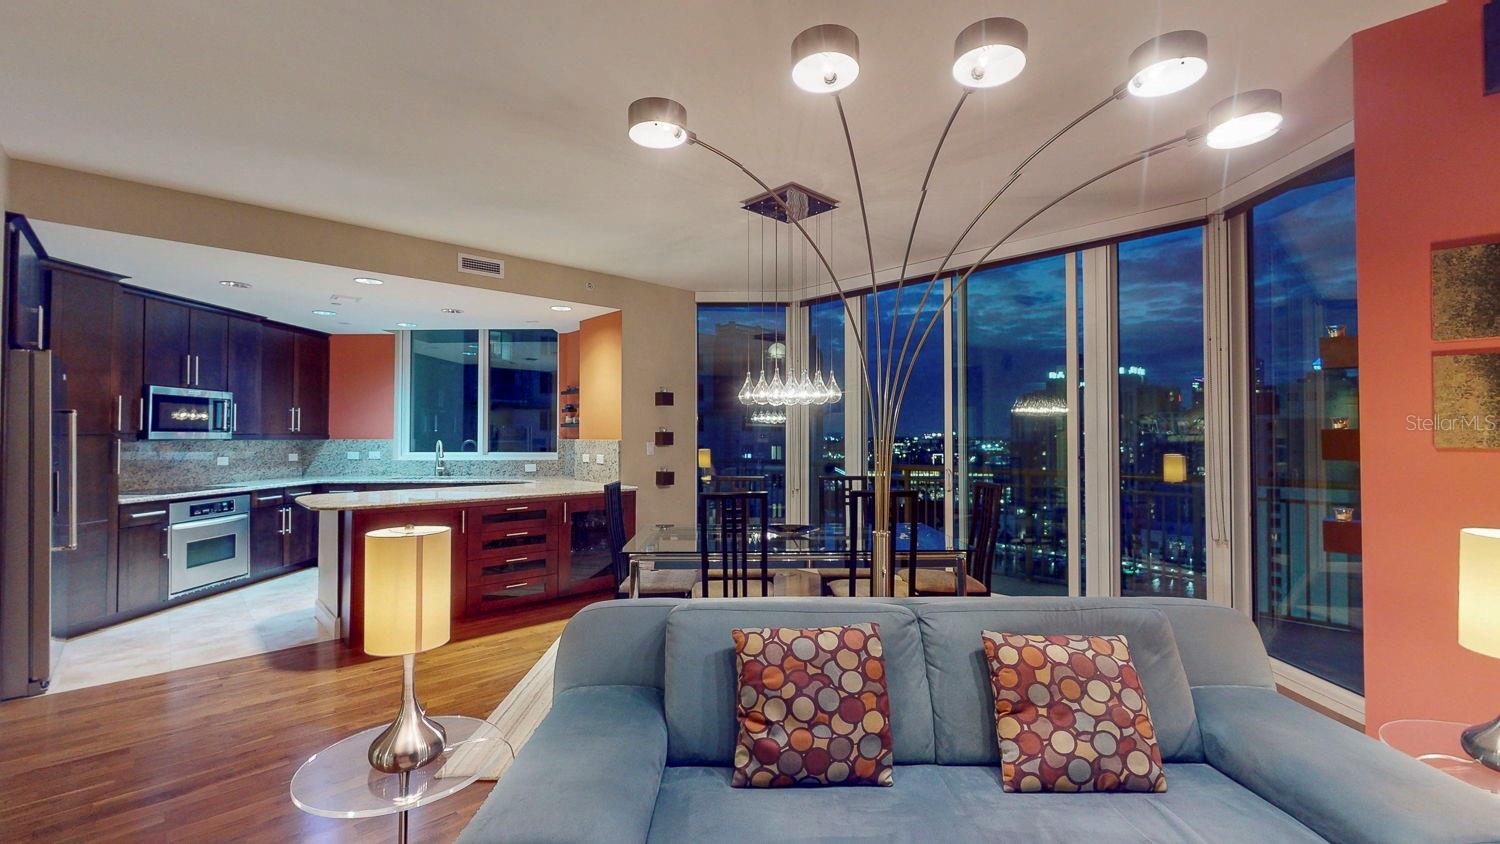 A glimpse of the living area featuring the evening skyline.